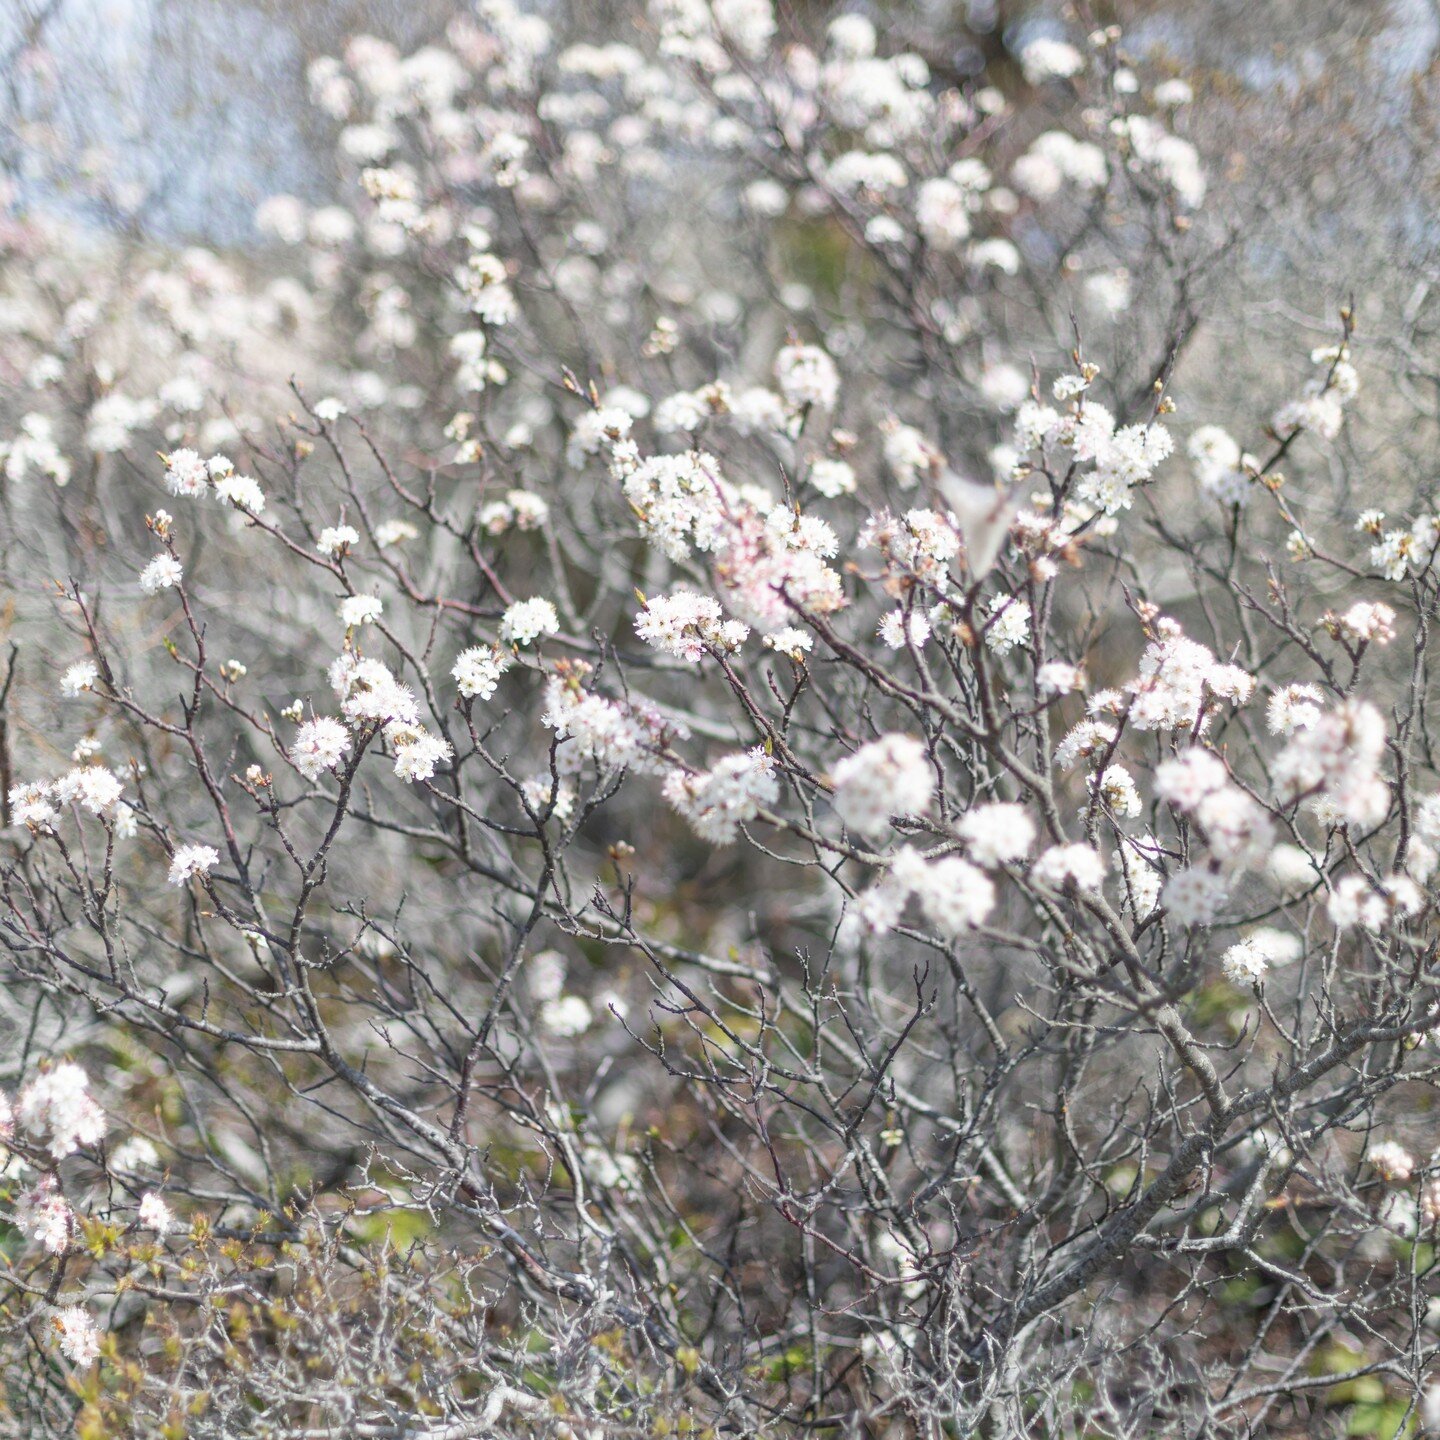 loving these Iight and airy beach🌸plum blossoms at south cape beach in mashpee✨
.
.
.
.
#wildflowers #flowers #flowersofinstagram #capecod #capecodinsta #capecodlife #mashpee #newengland #newenglandliving #weddingphotographer #portraitphotographer #